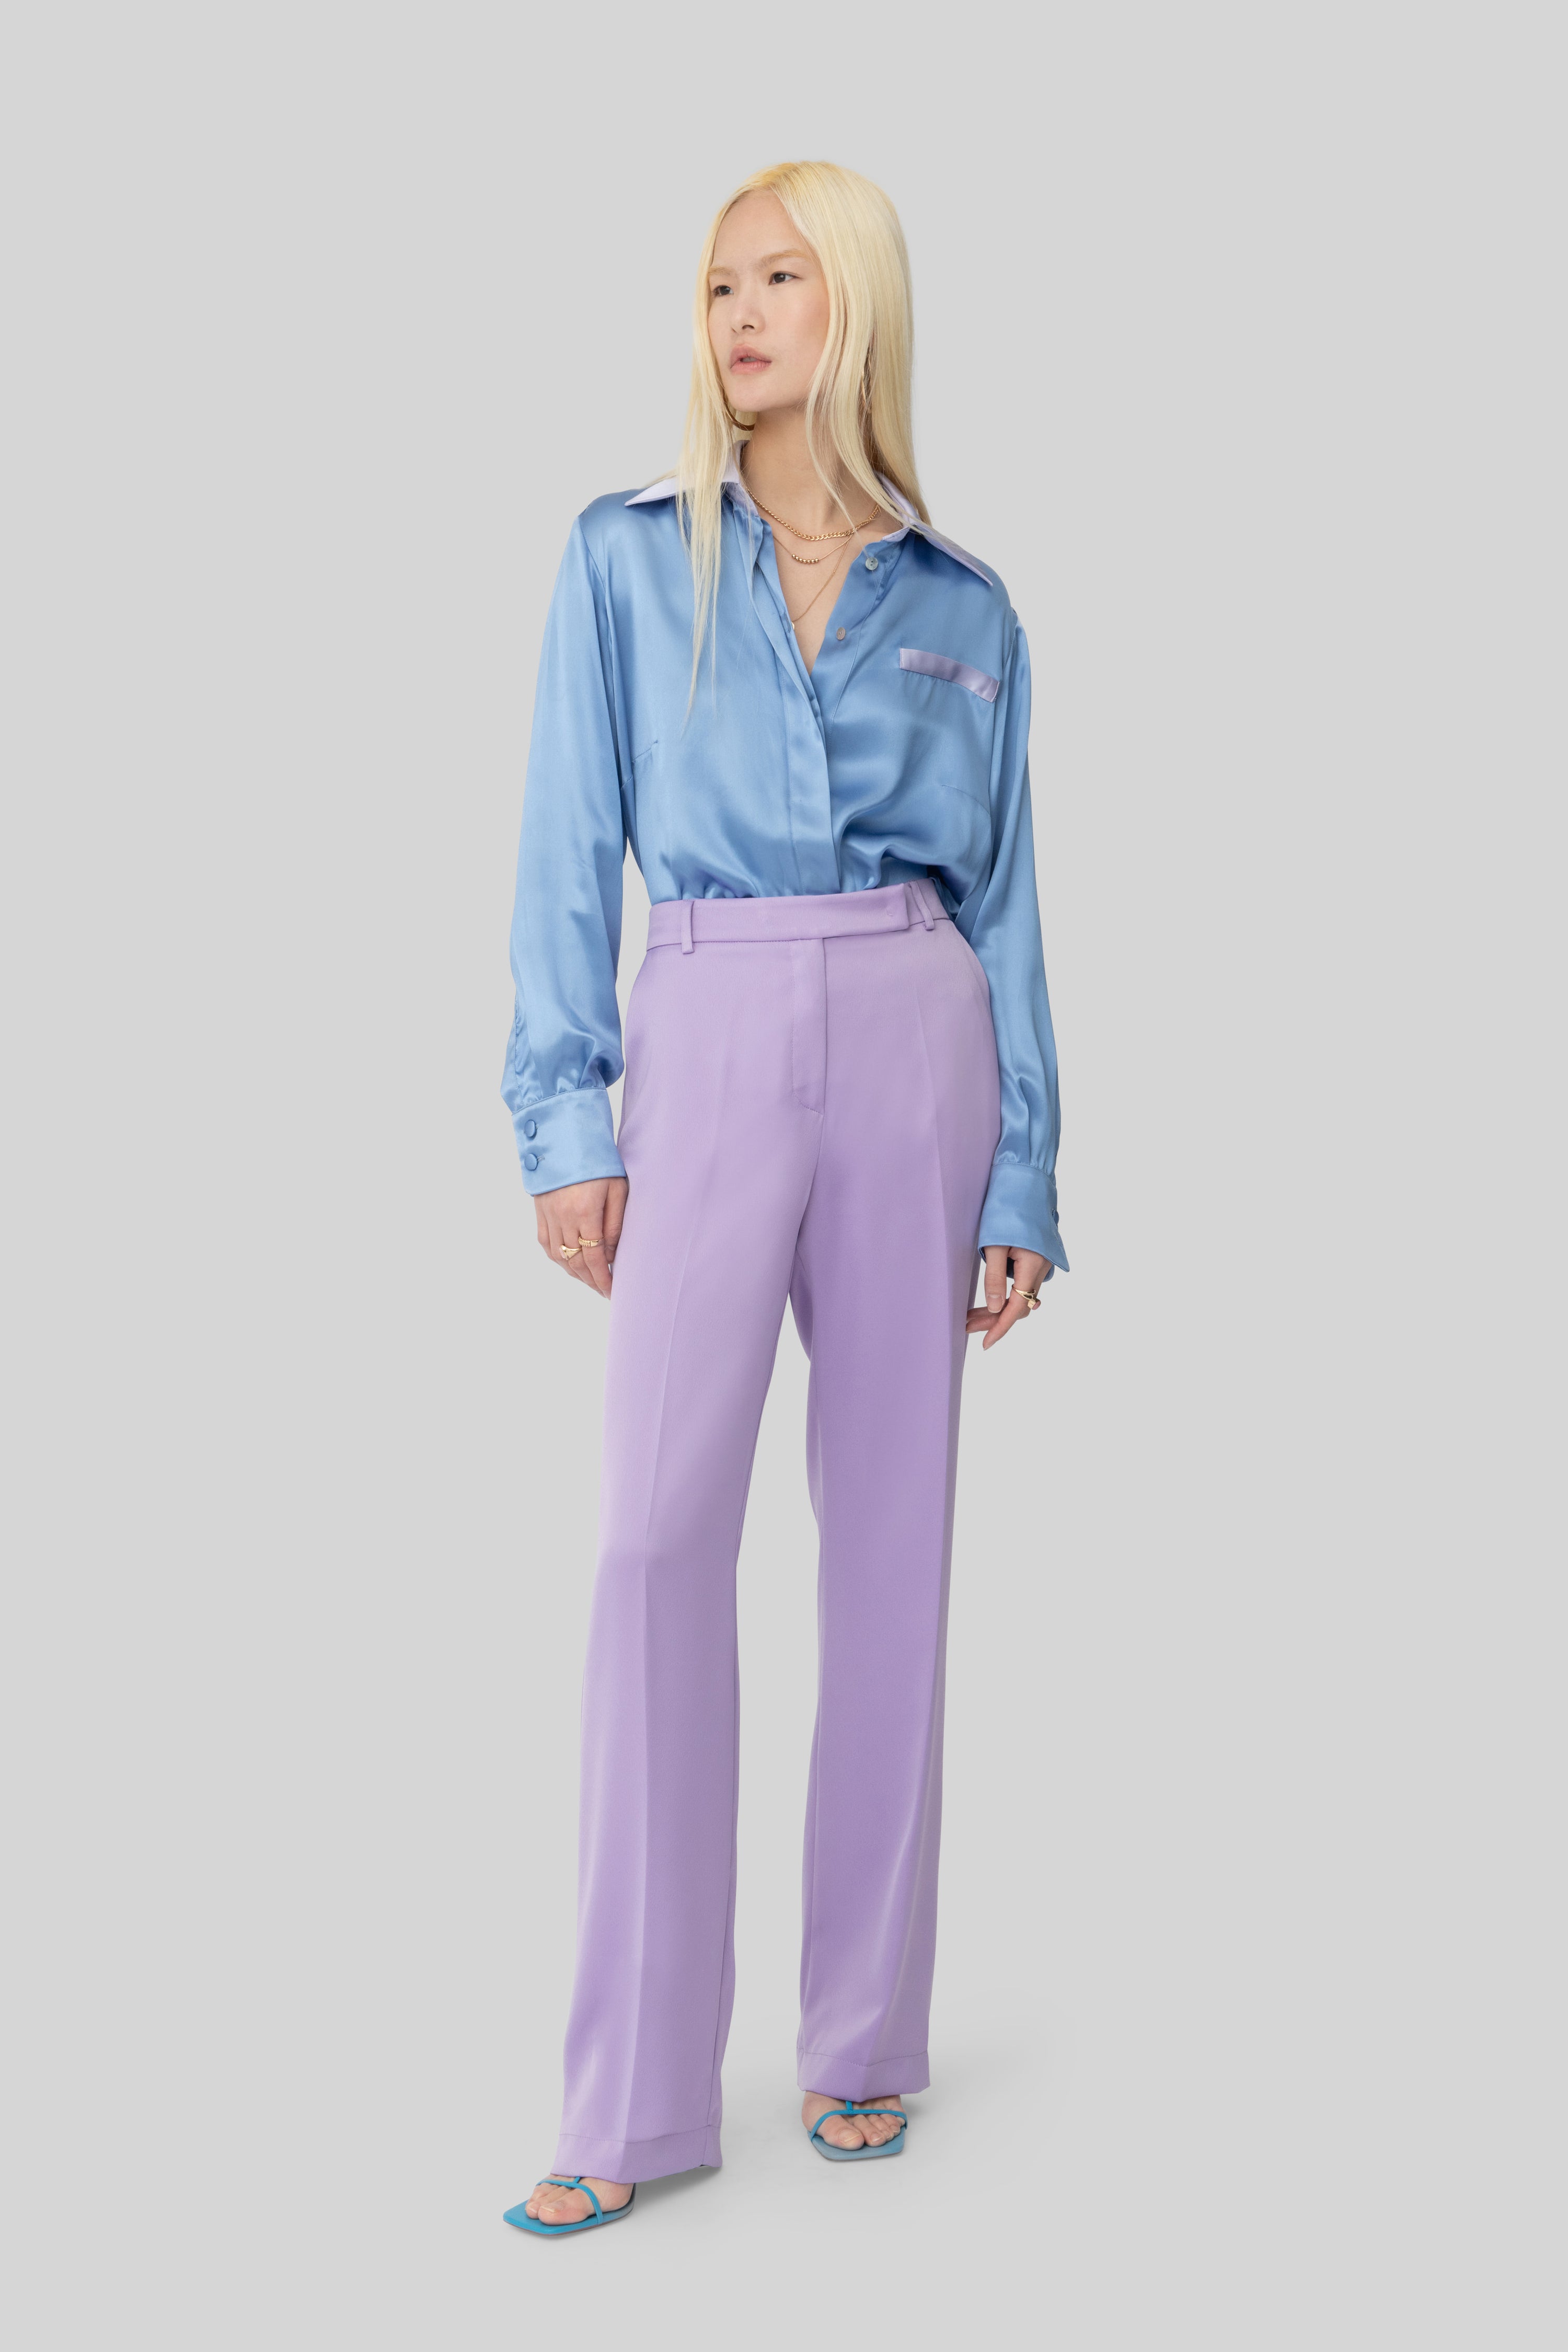 The Lilac Satin Lover Pants